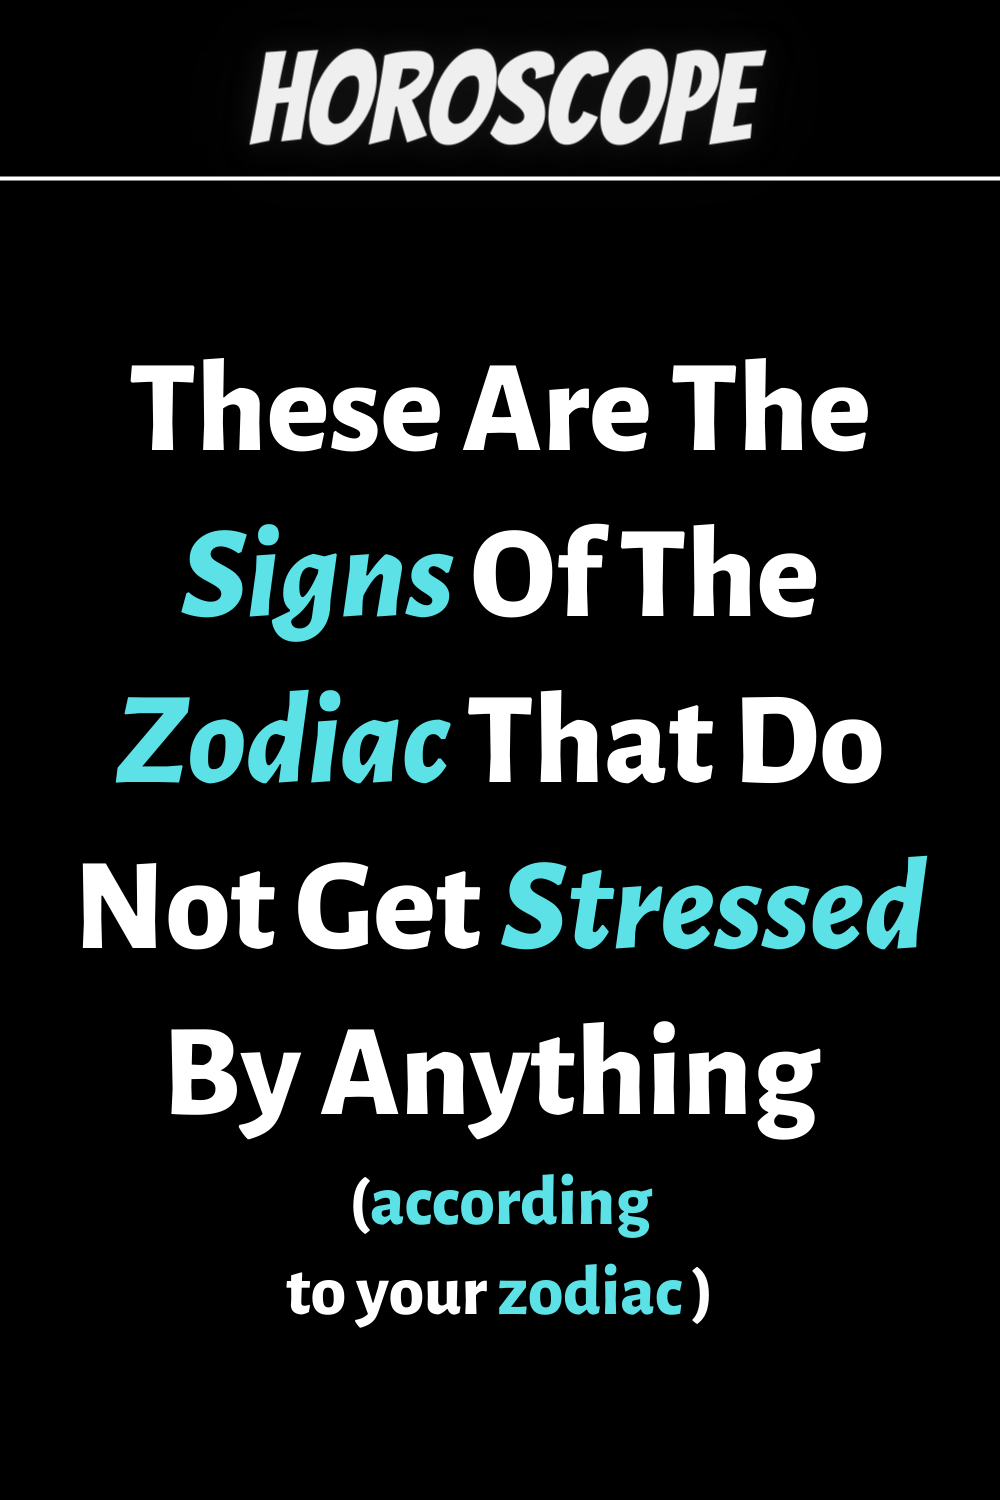 These Are The Signs Of The Zodiac That Do Not Get Stressed By Anything According To Astrology